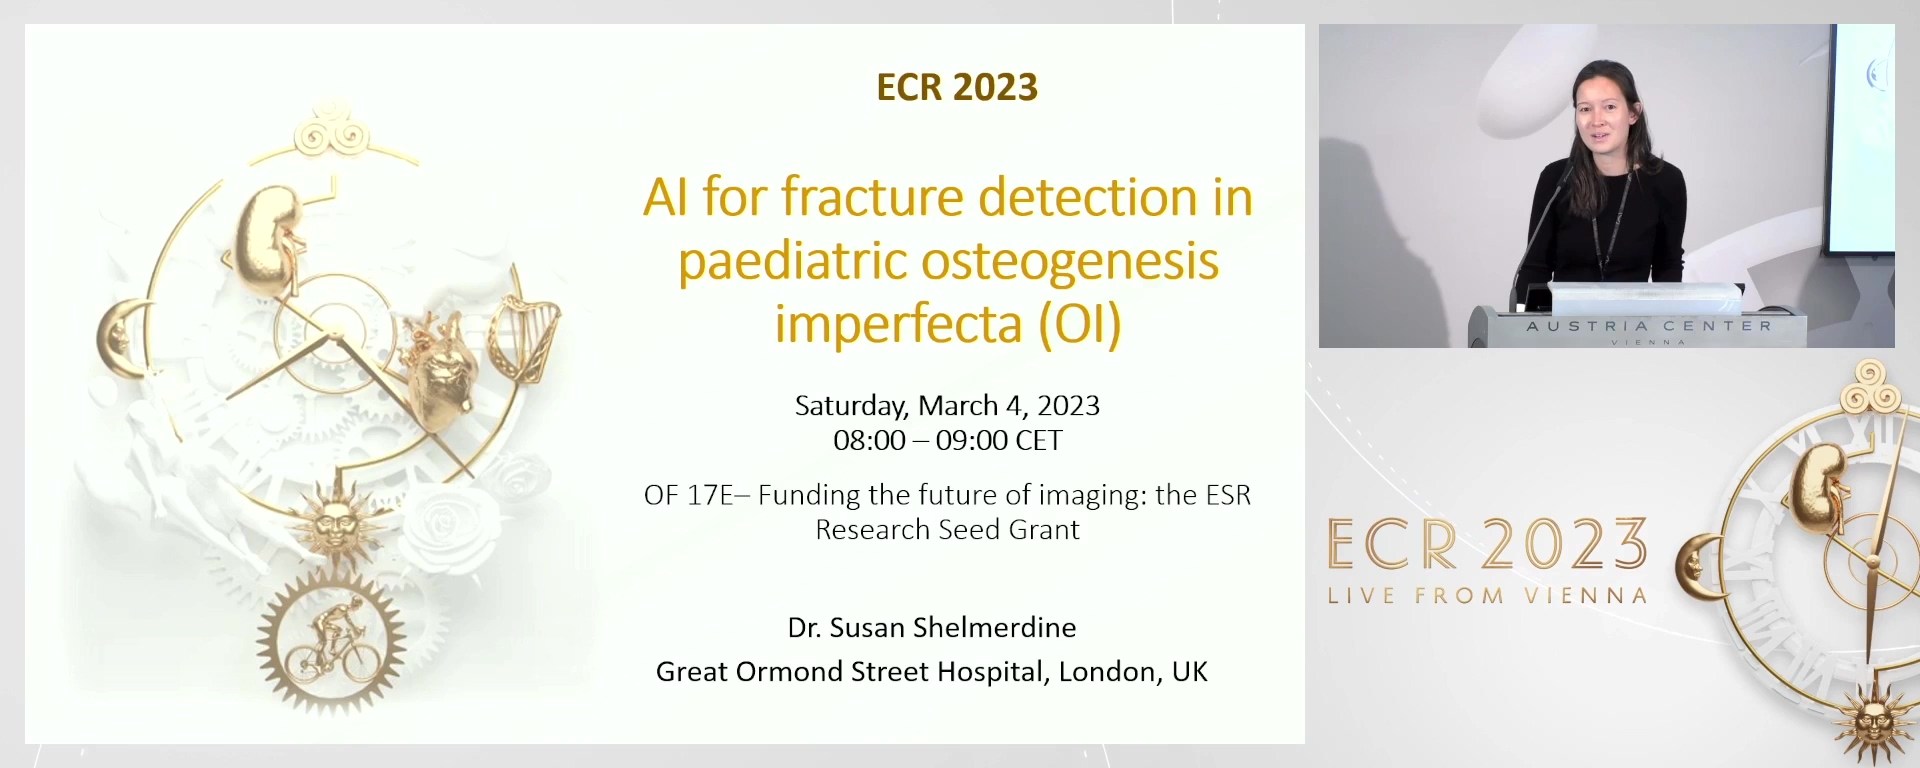 Artificial intelligence for fracture detection in paediatric osteogenesis imperfecta - Susan Cheng Shelmerdine, London / UK